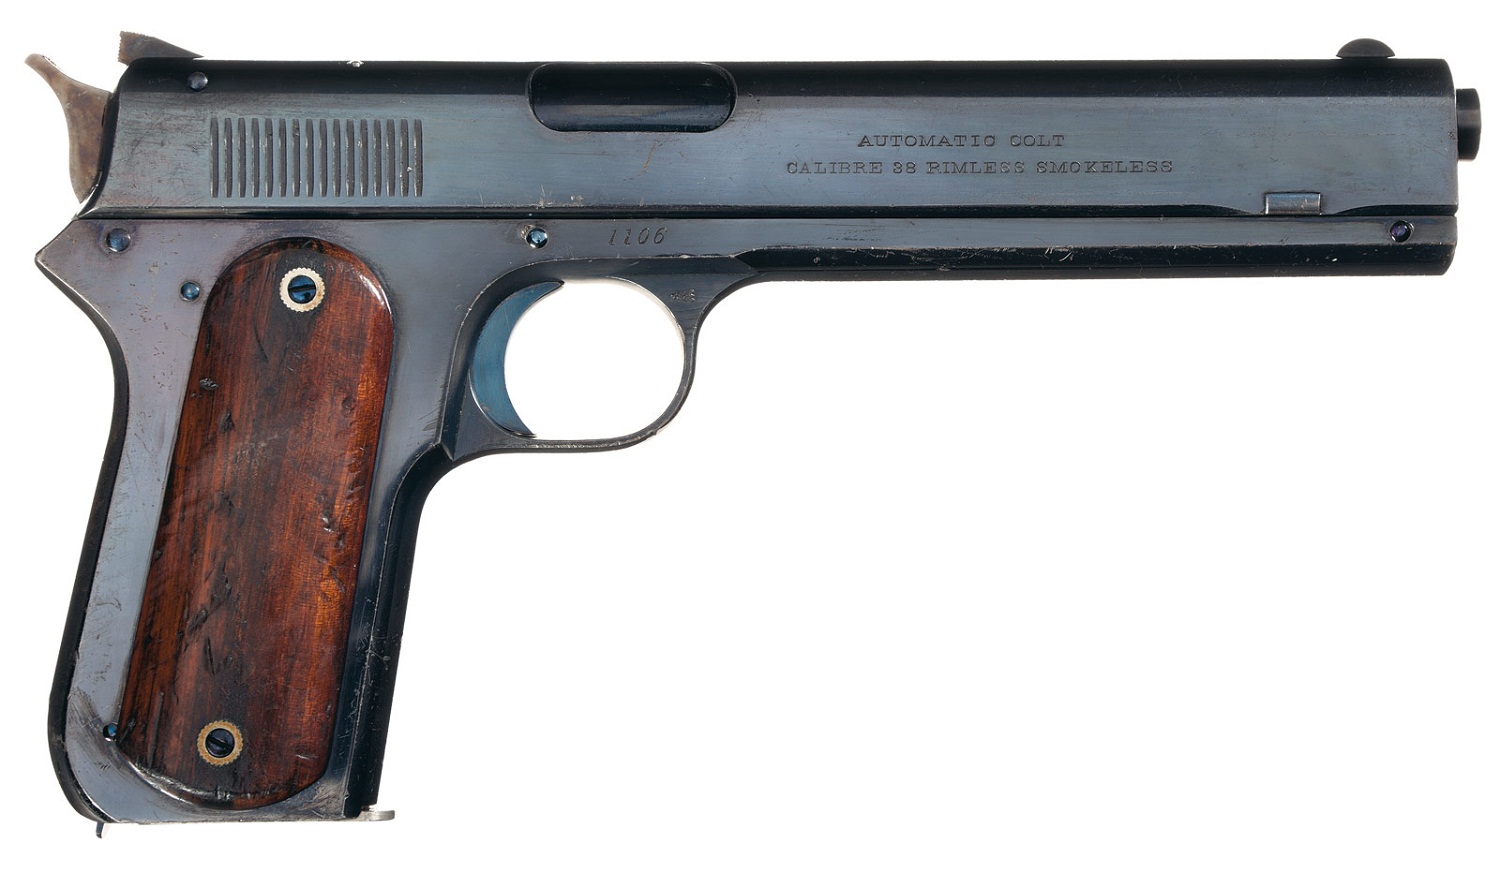 Navy Contract - The Colt Model 1900